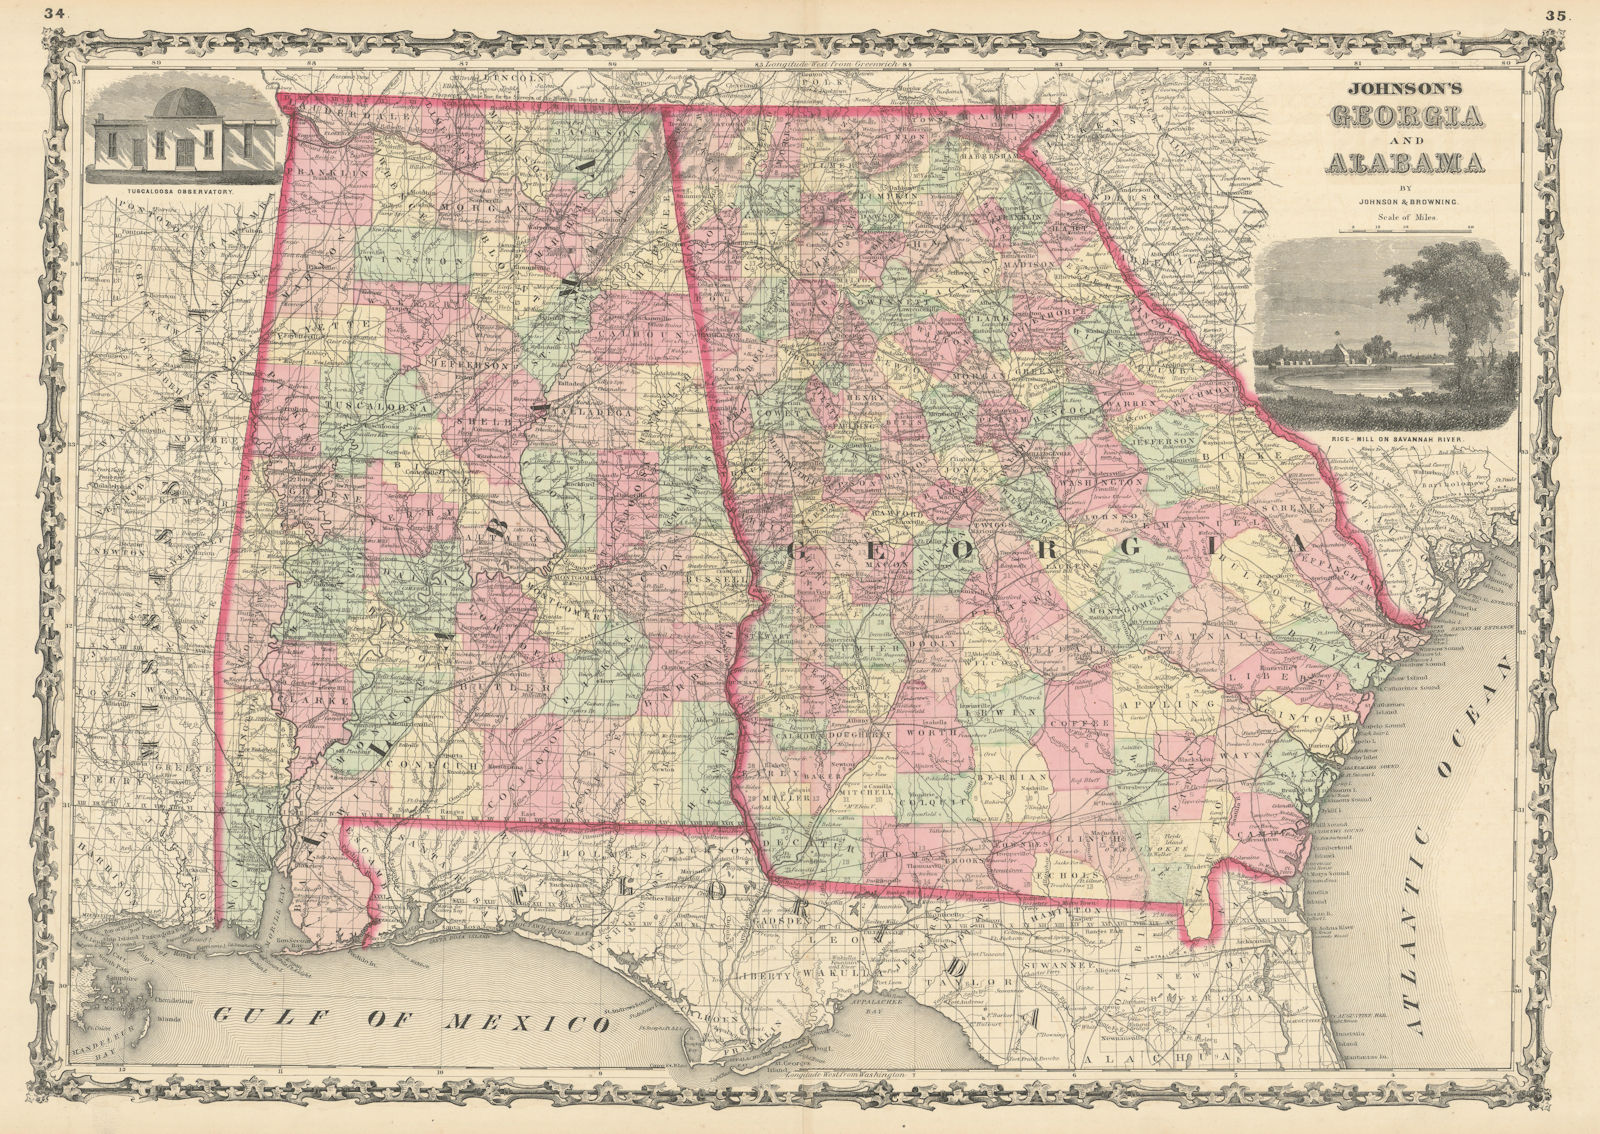 Associate Product Johnson's Georgia & Alabama. US state map showing counties 1861 old